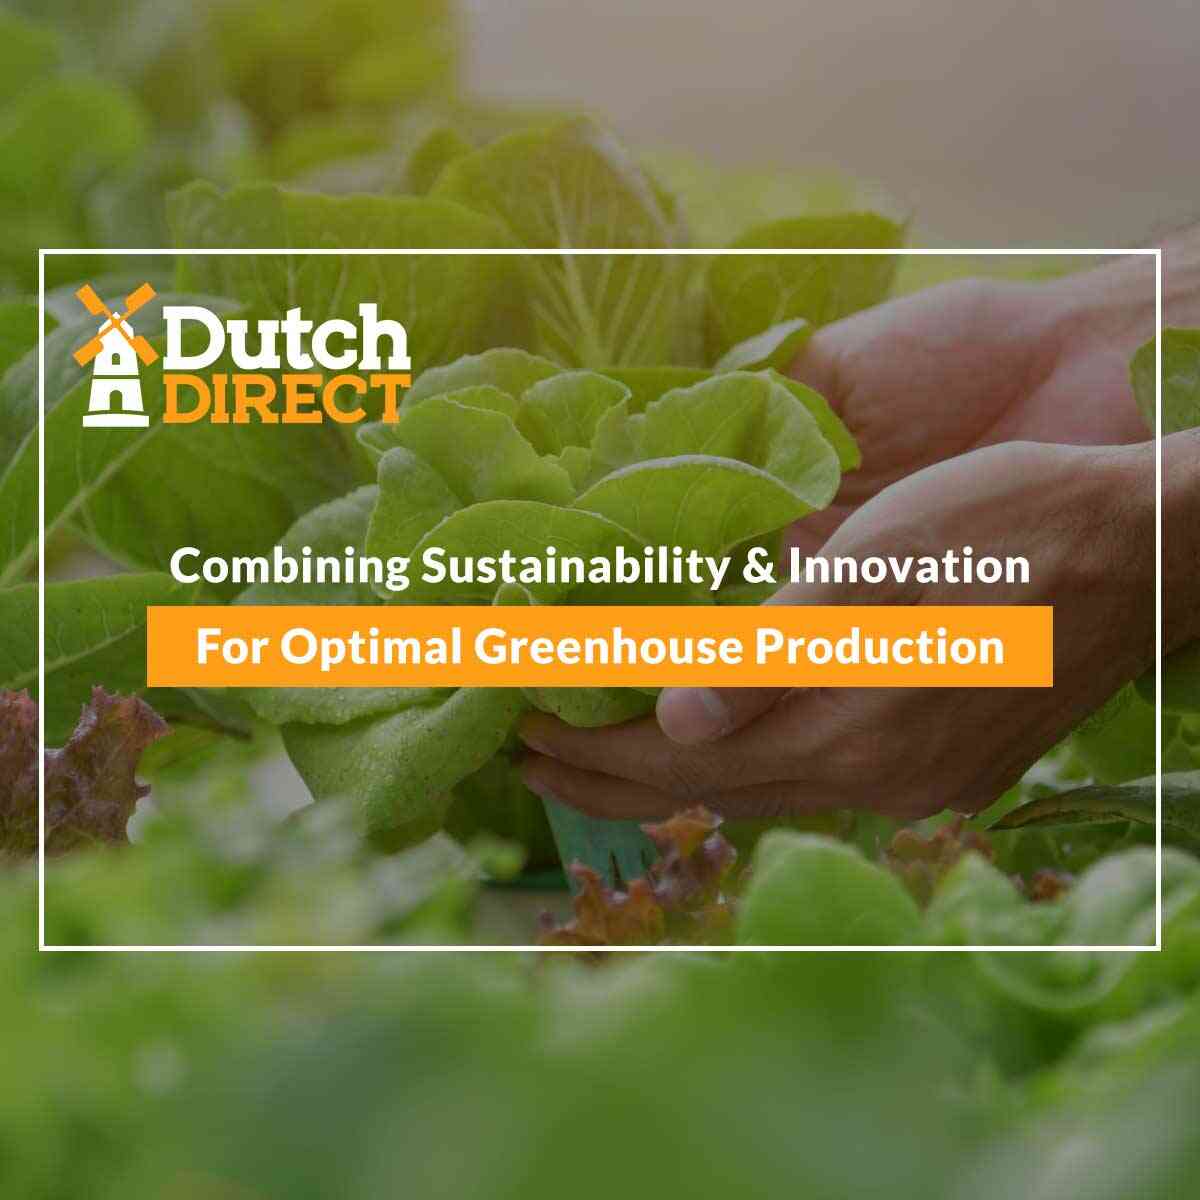 Combining Sustainability & Innovation For Optimal Greenhouse Production